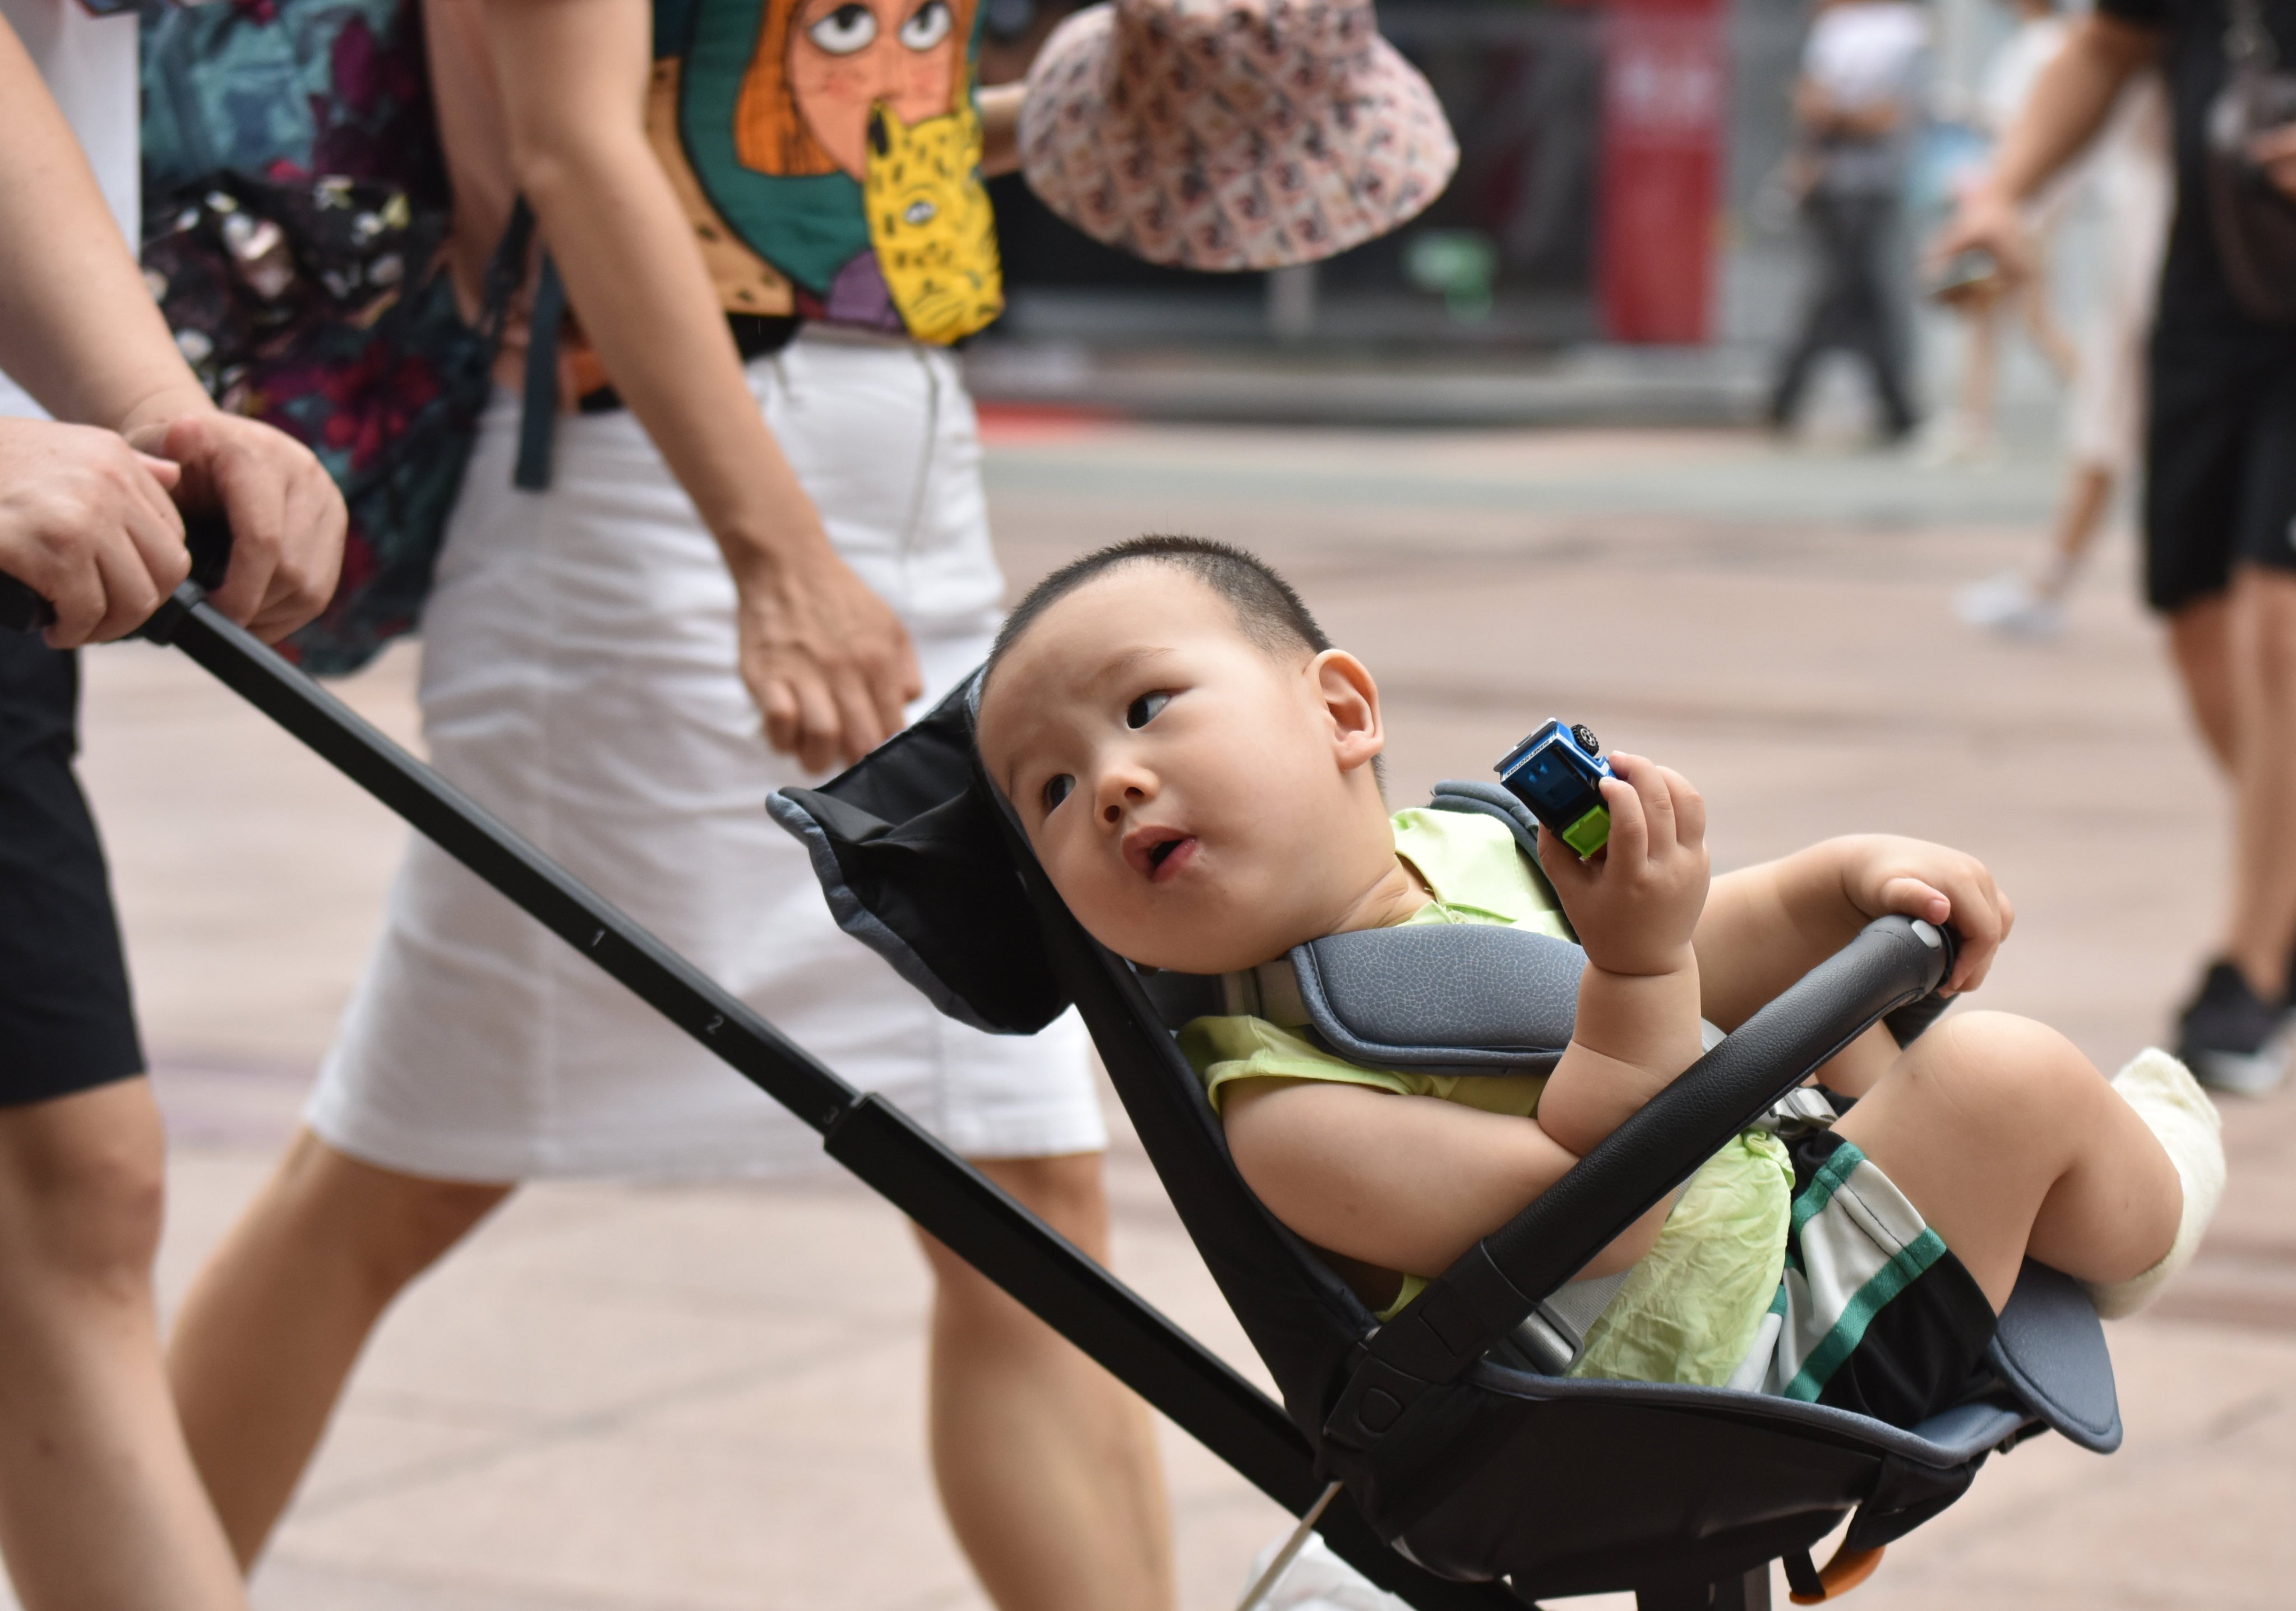 A parent pushes a child in a pram in Beijing on July 21, 2021. Photo: Getty Images